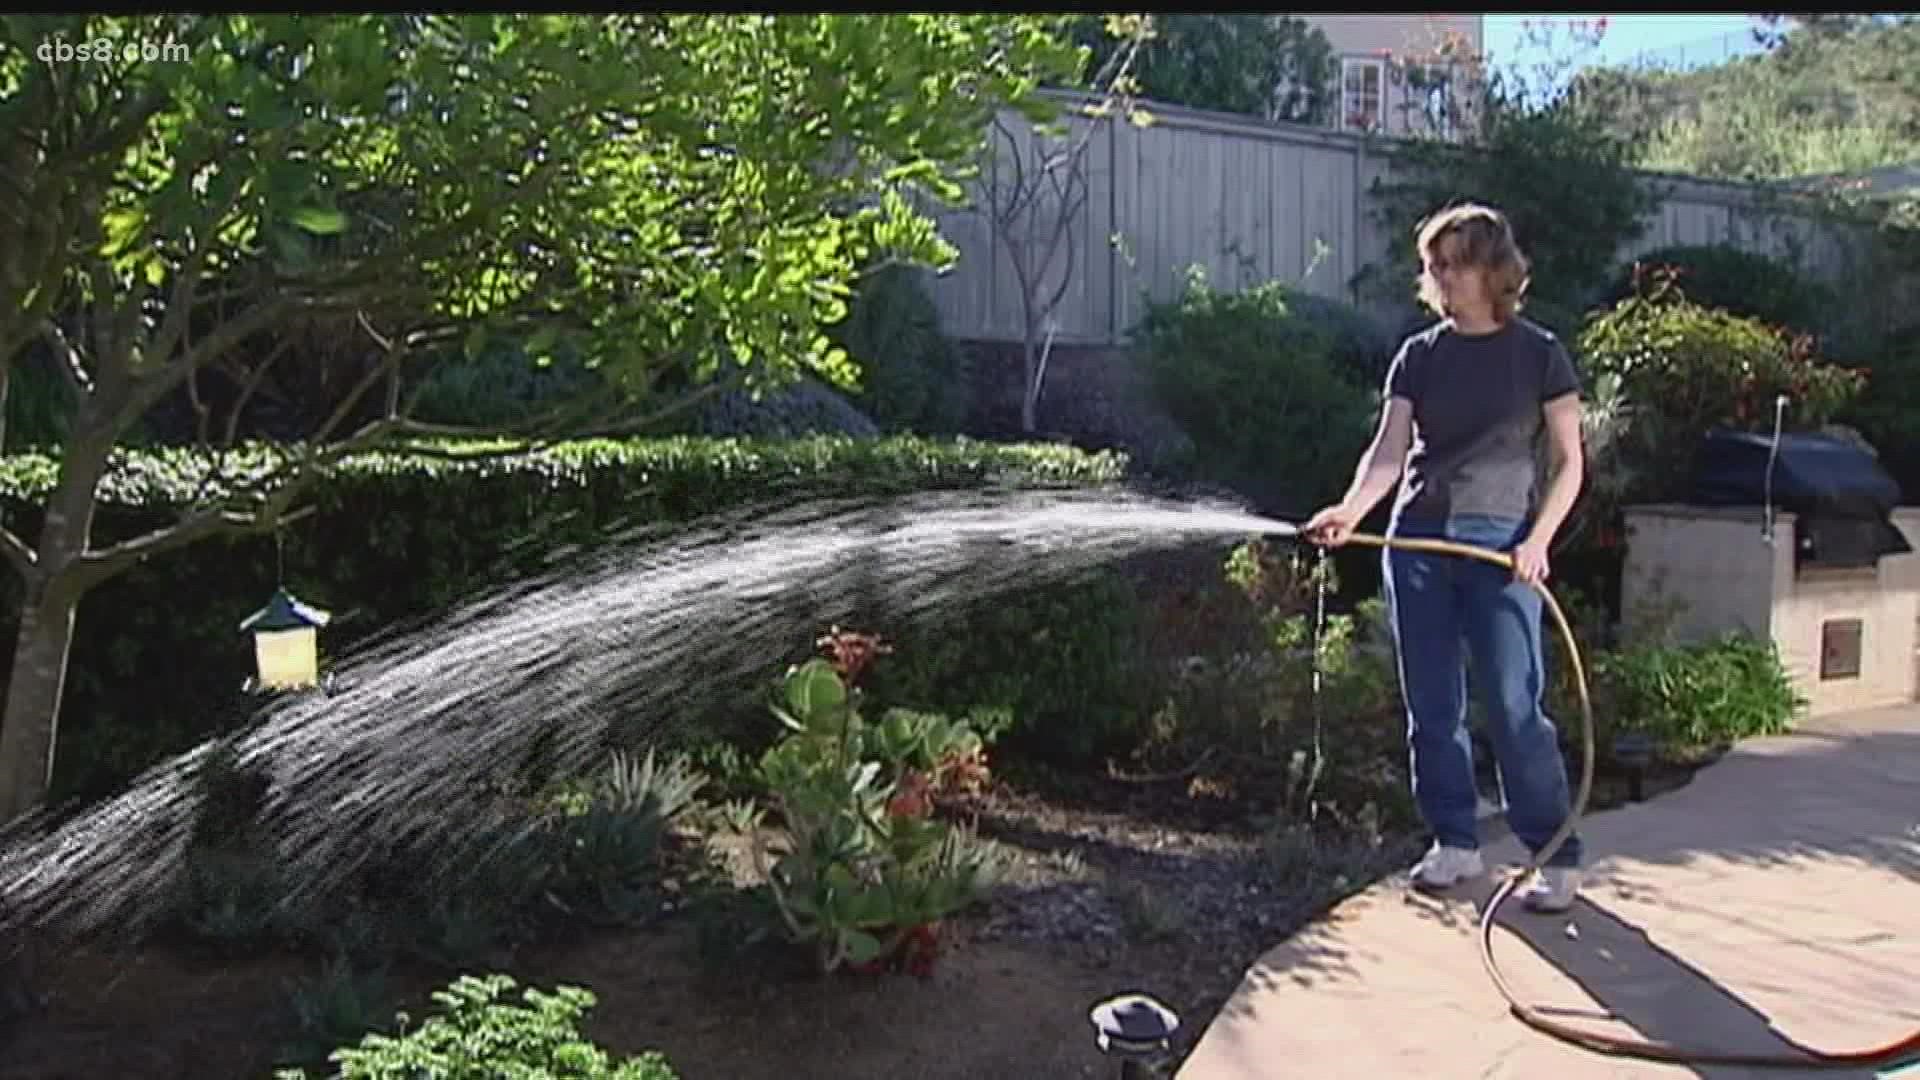 The governor said these restrictions may be put in place in late September. Californians are already being asked to voluntarily conserve water by 15%.